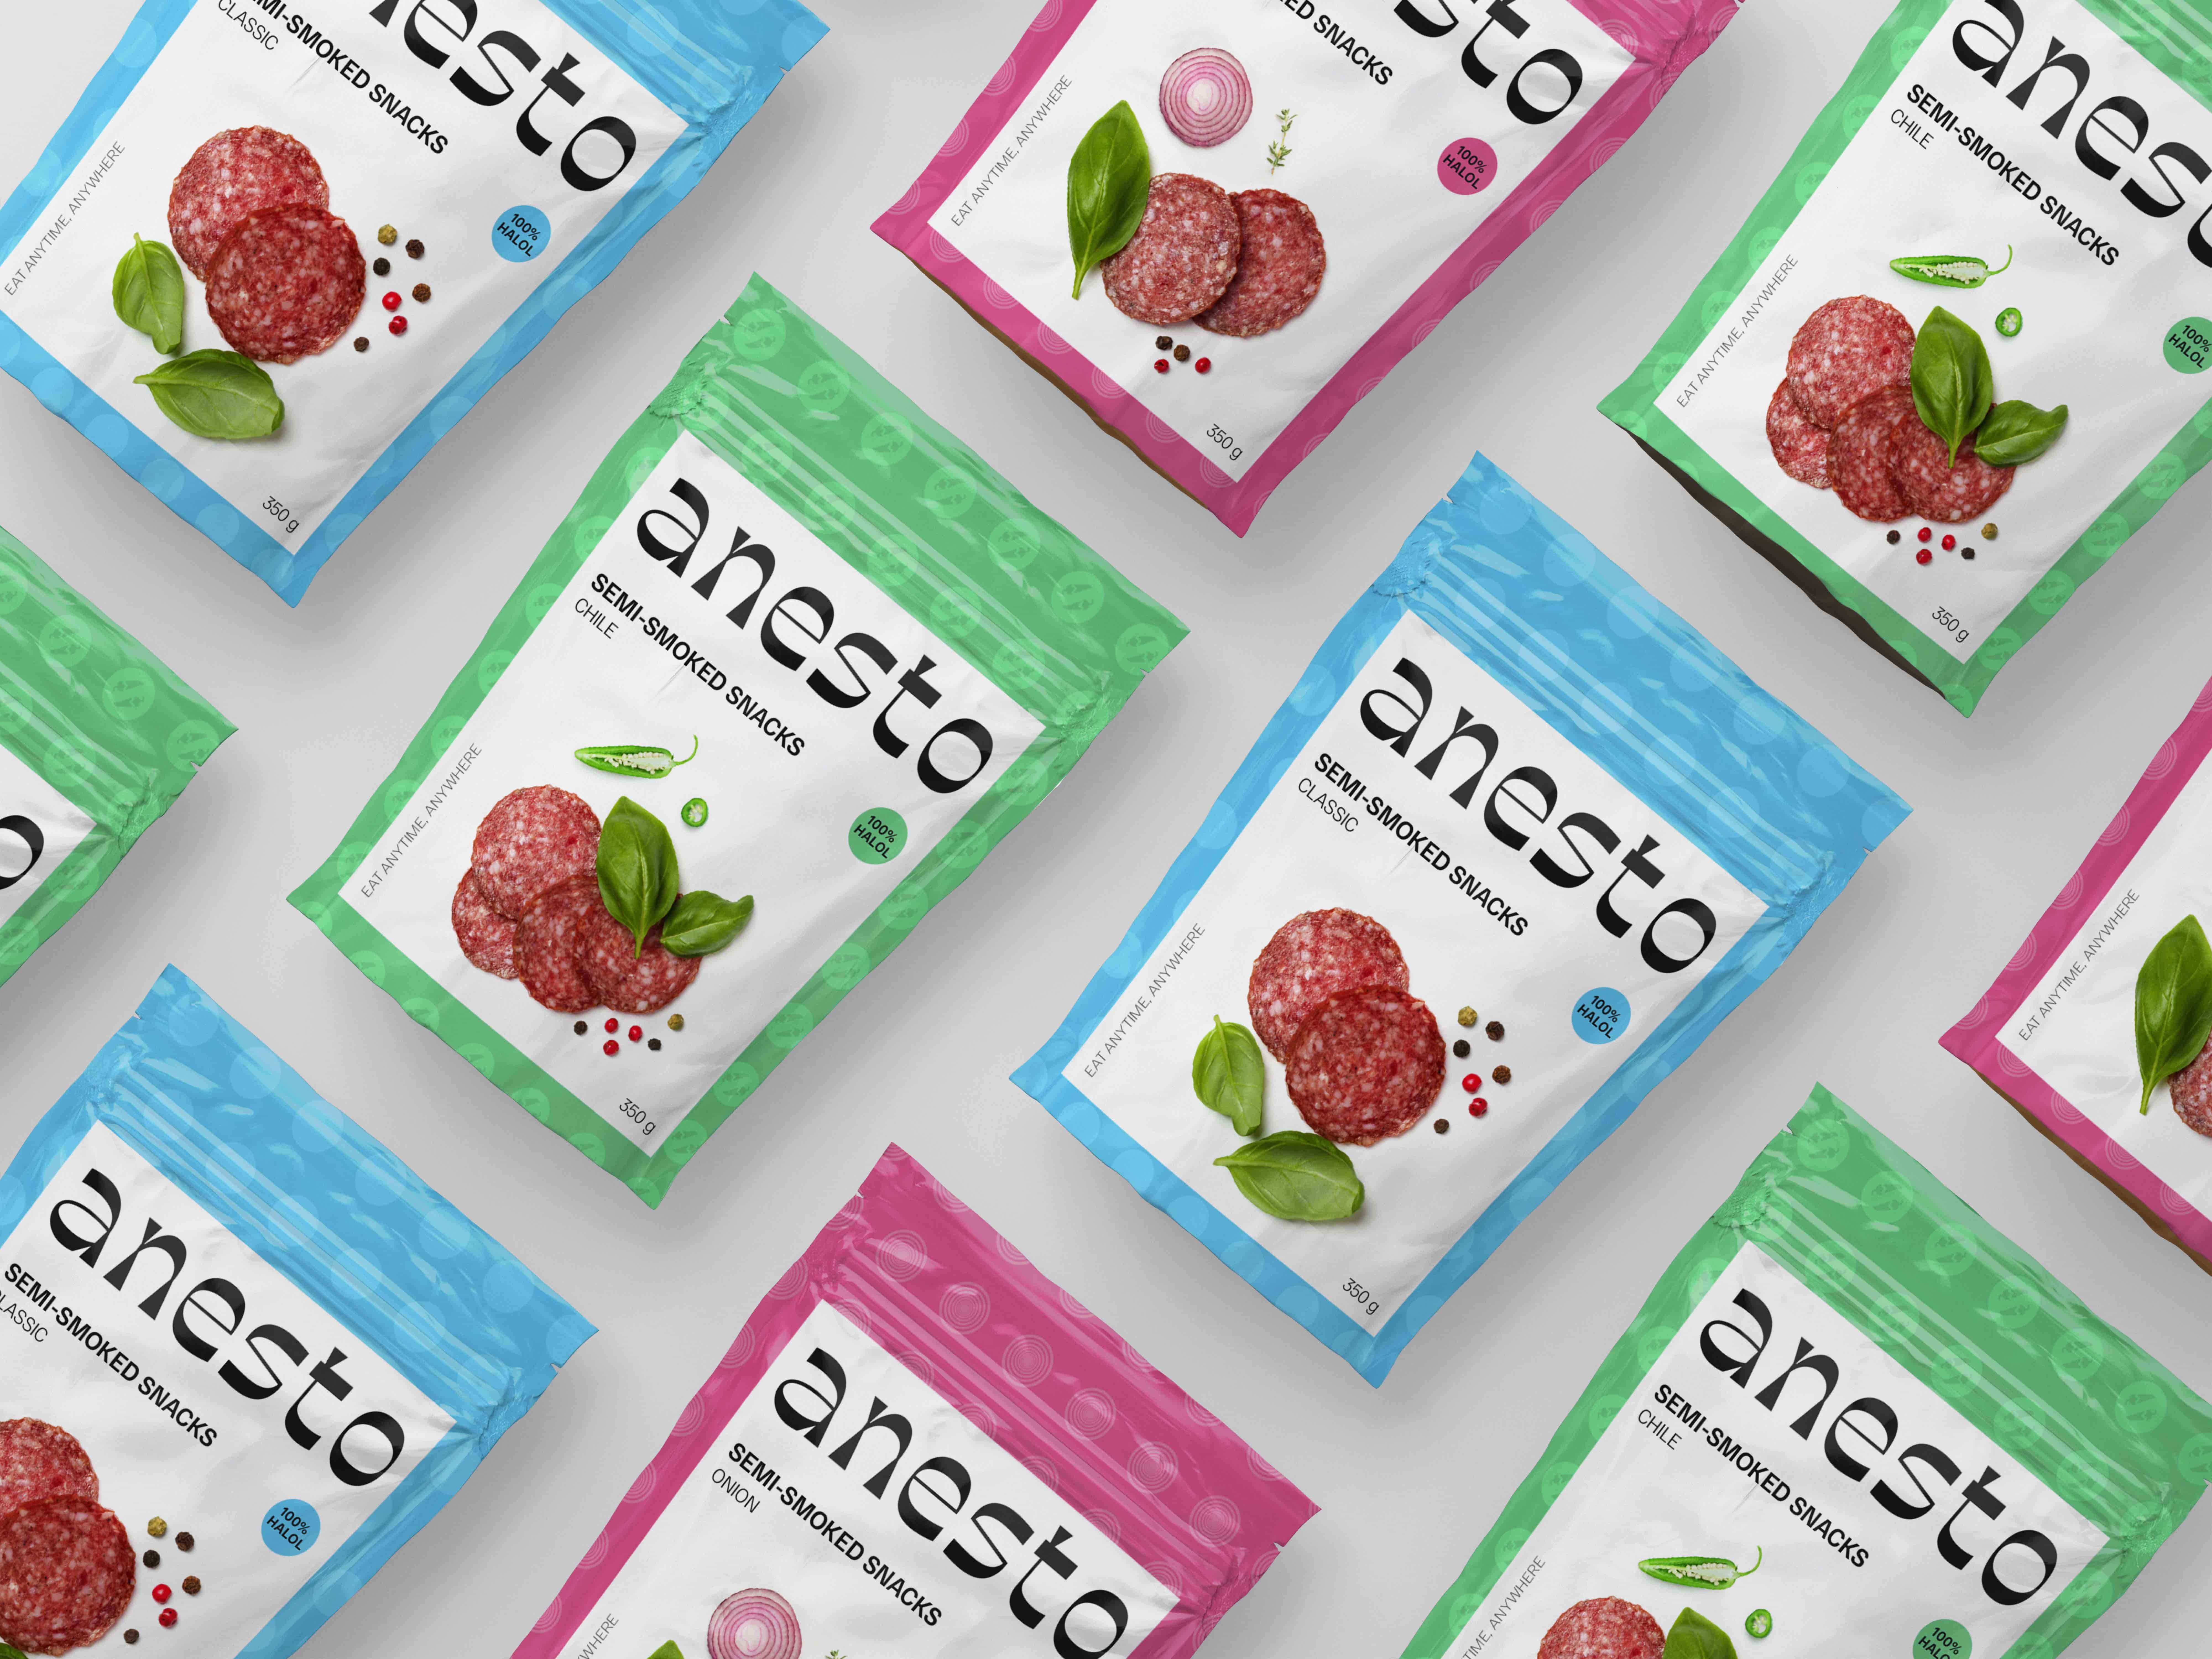 Student Packaging Design for Anesto Meat Snacks